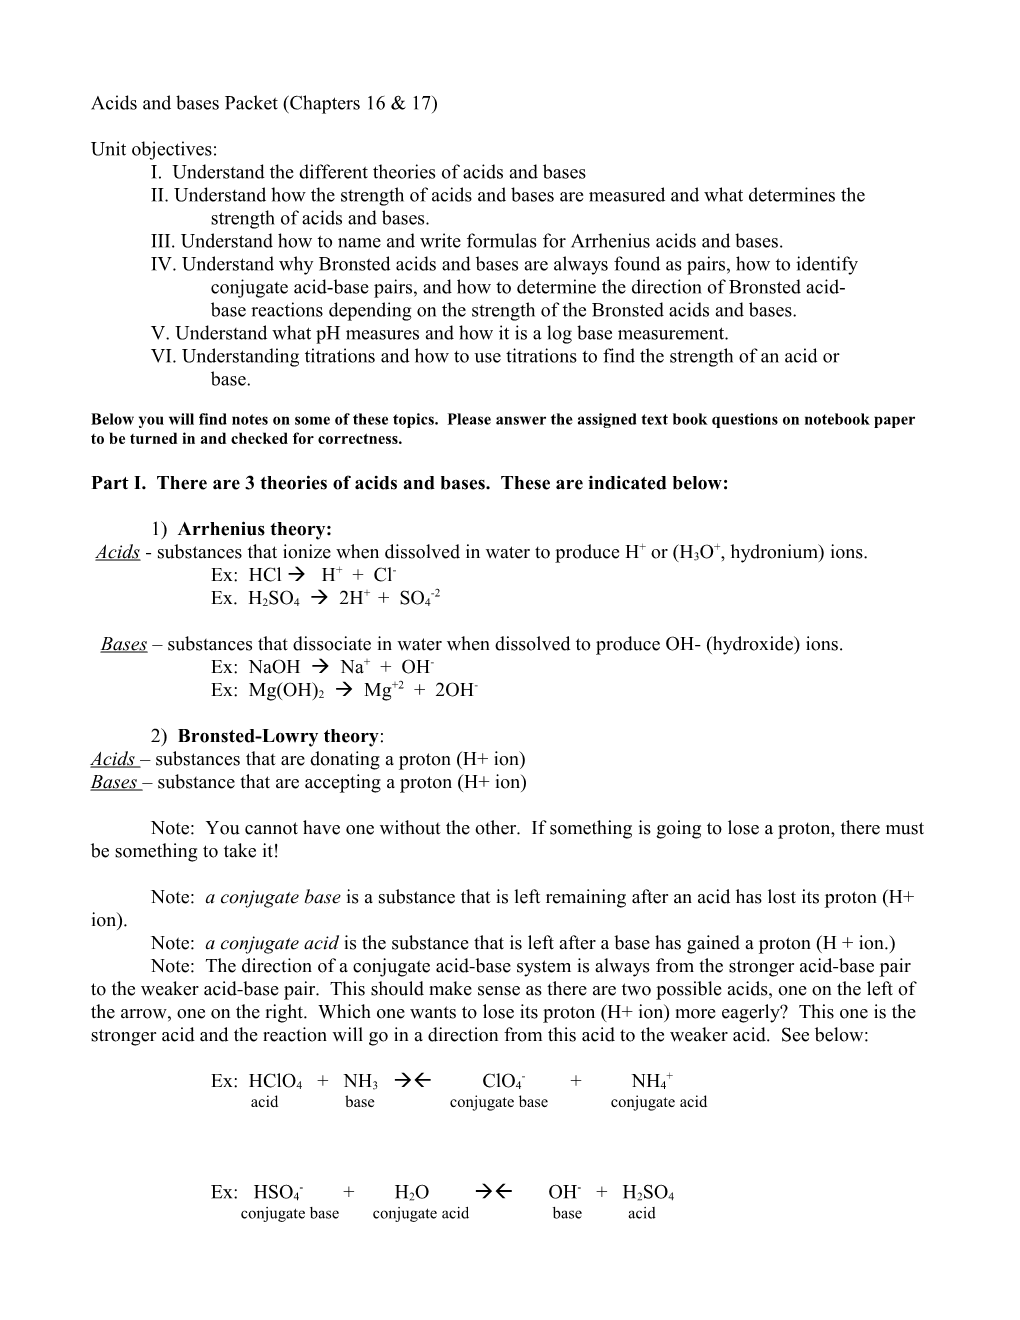 Acids and Bases Packet (Chapters 16 & 17)